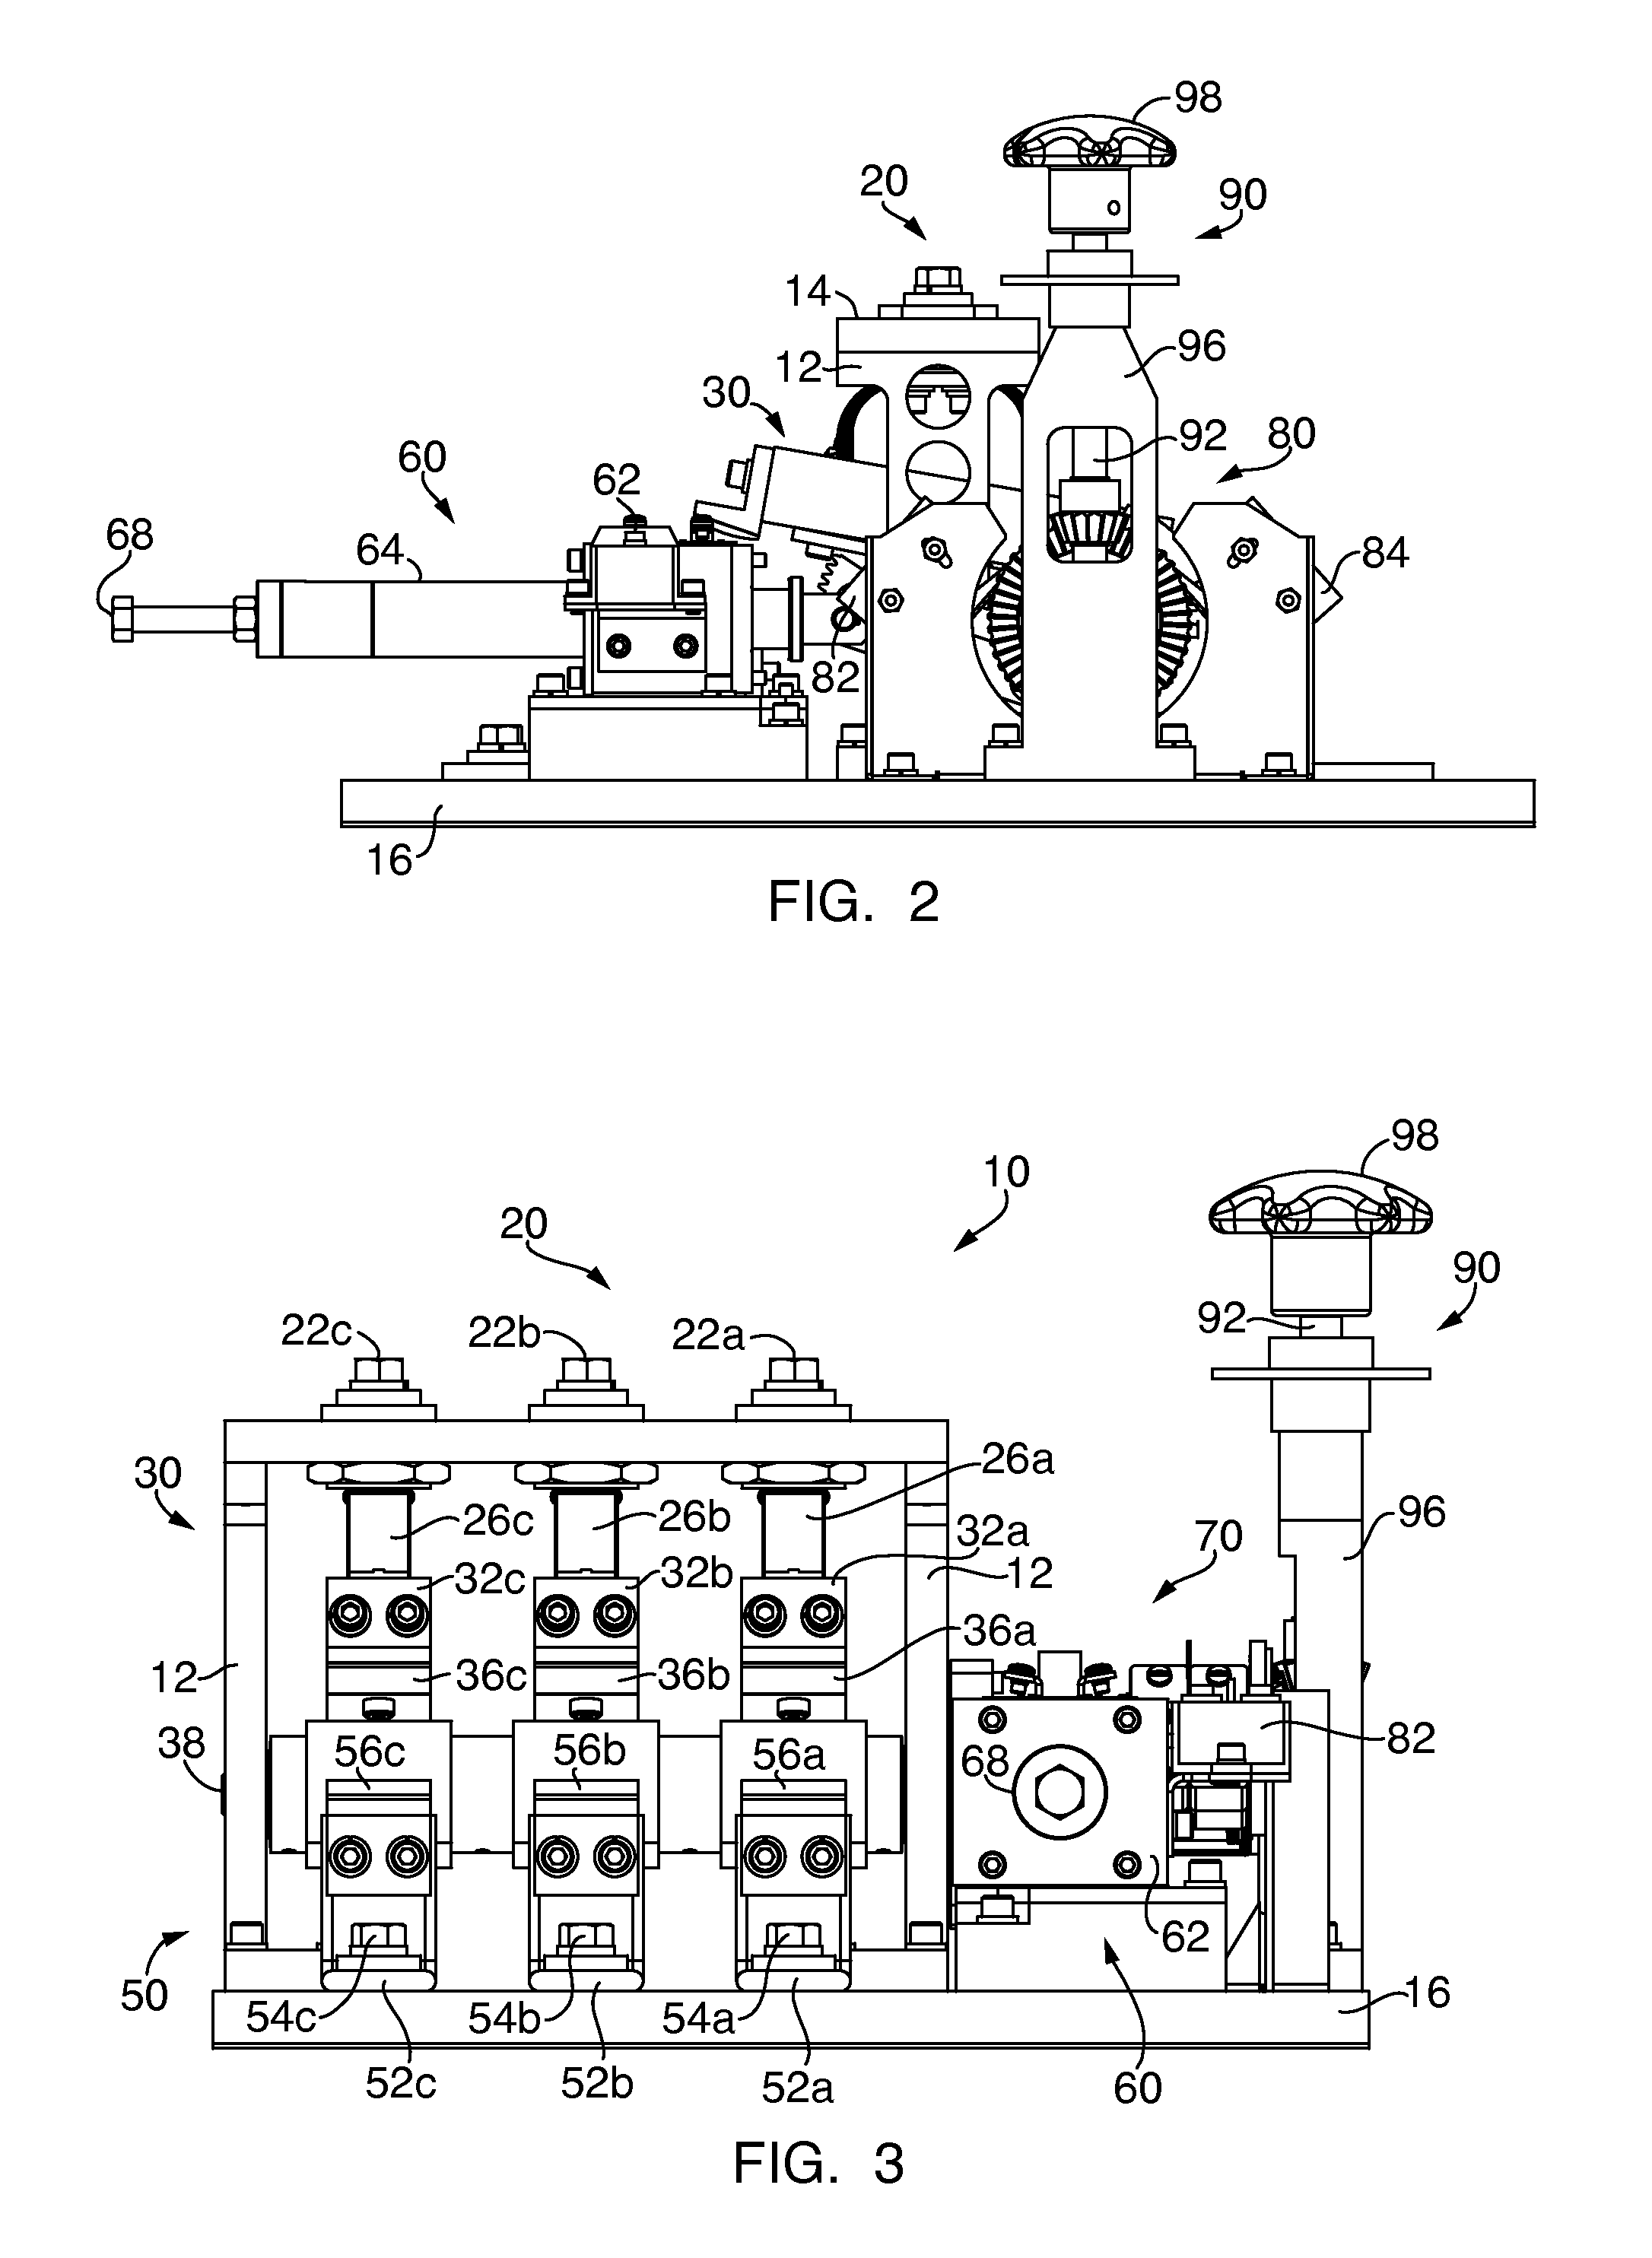 Solenoid-driven automatic transfer switch